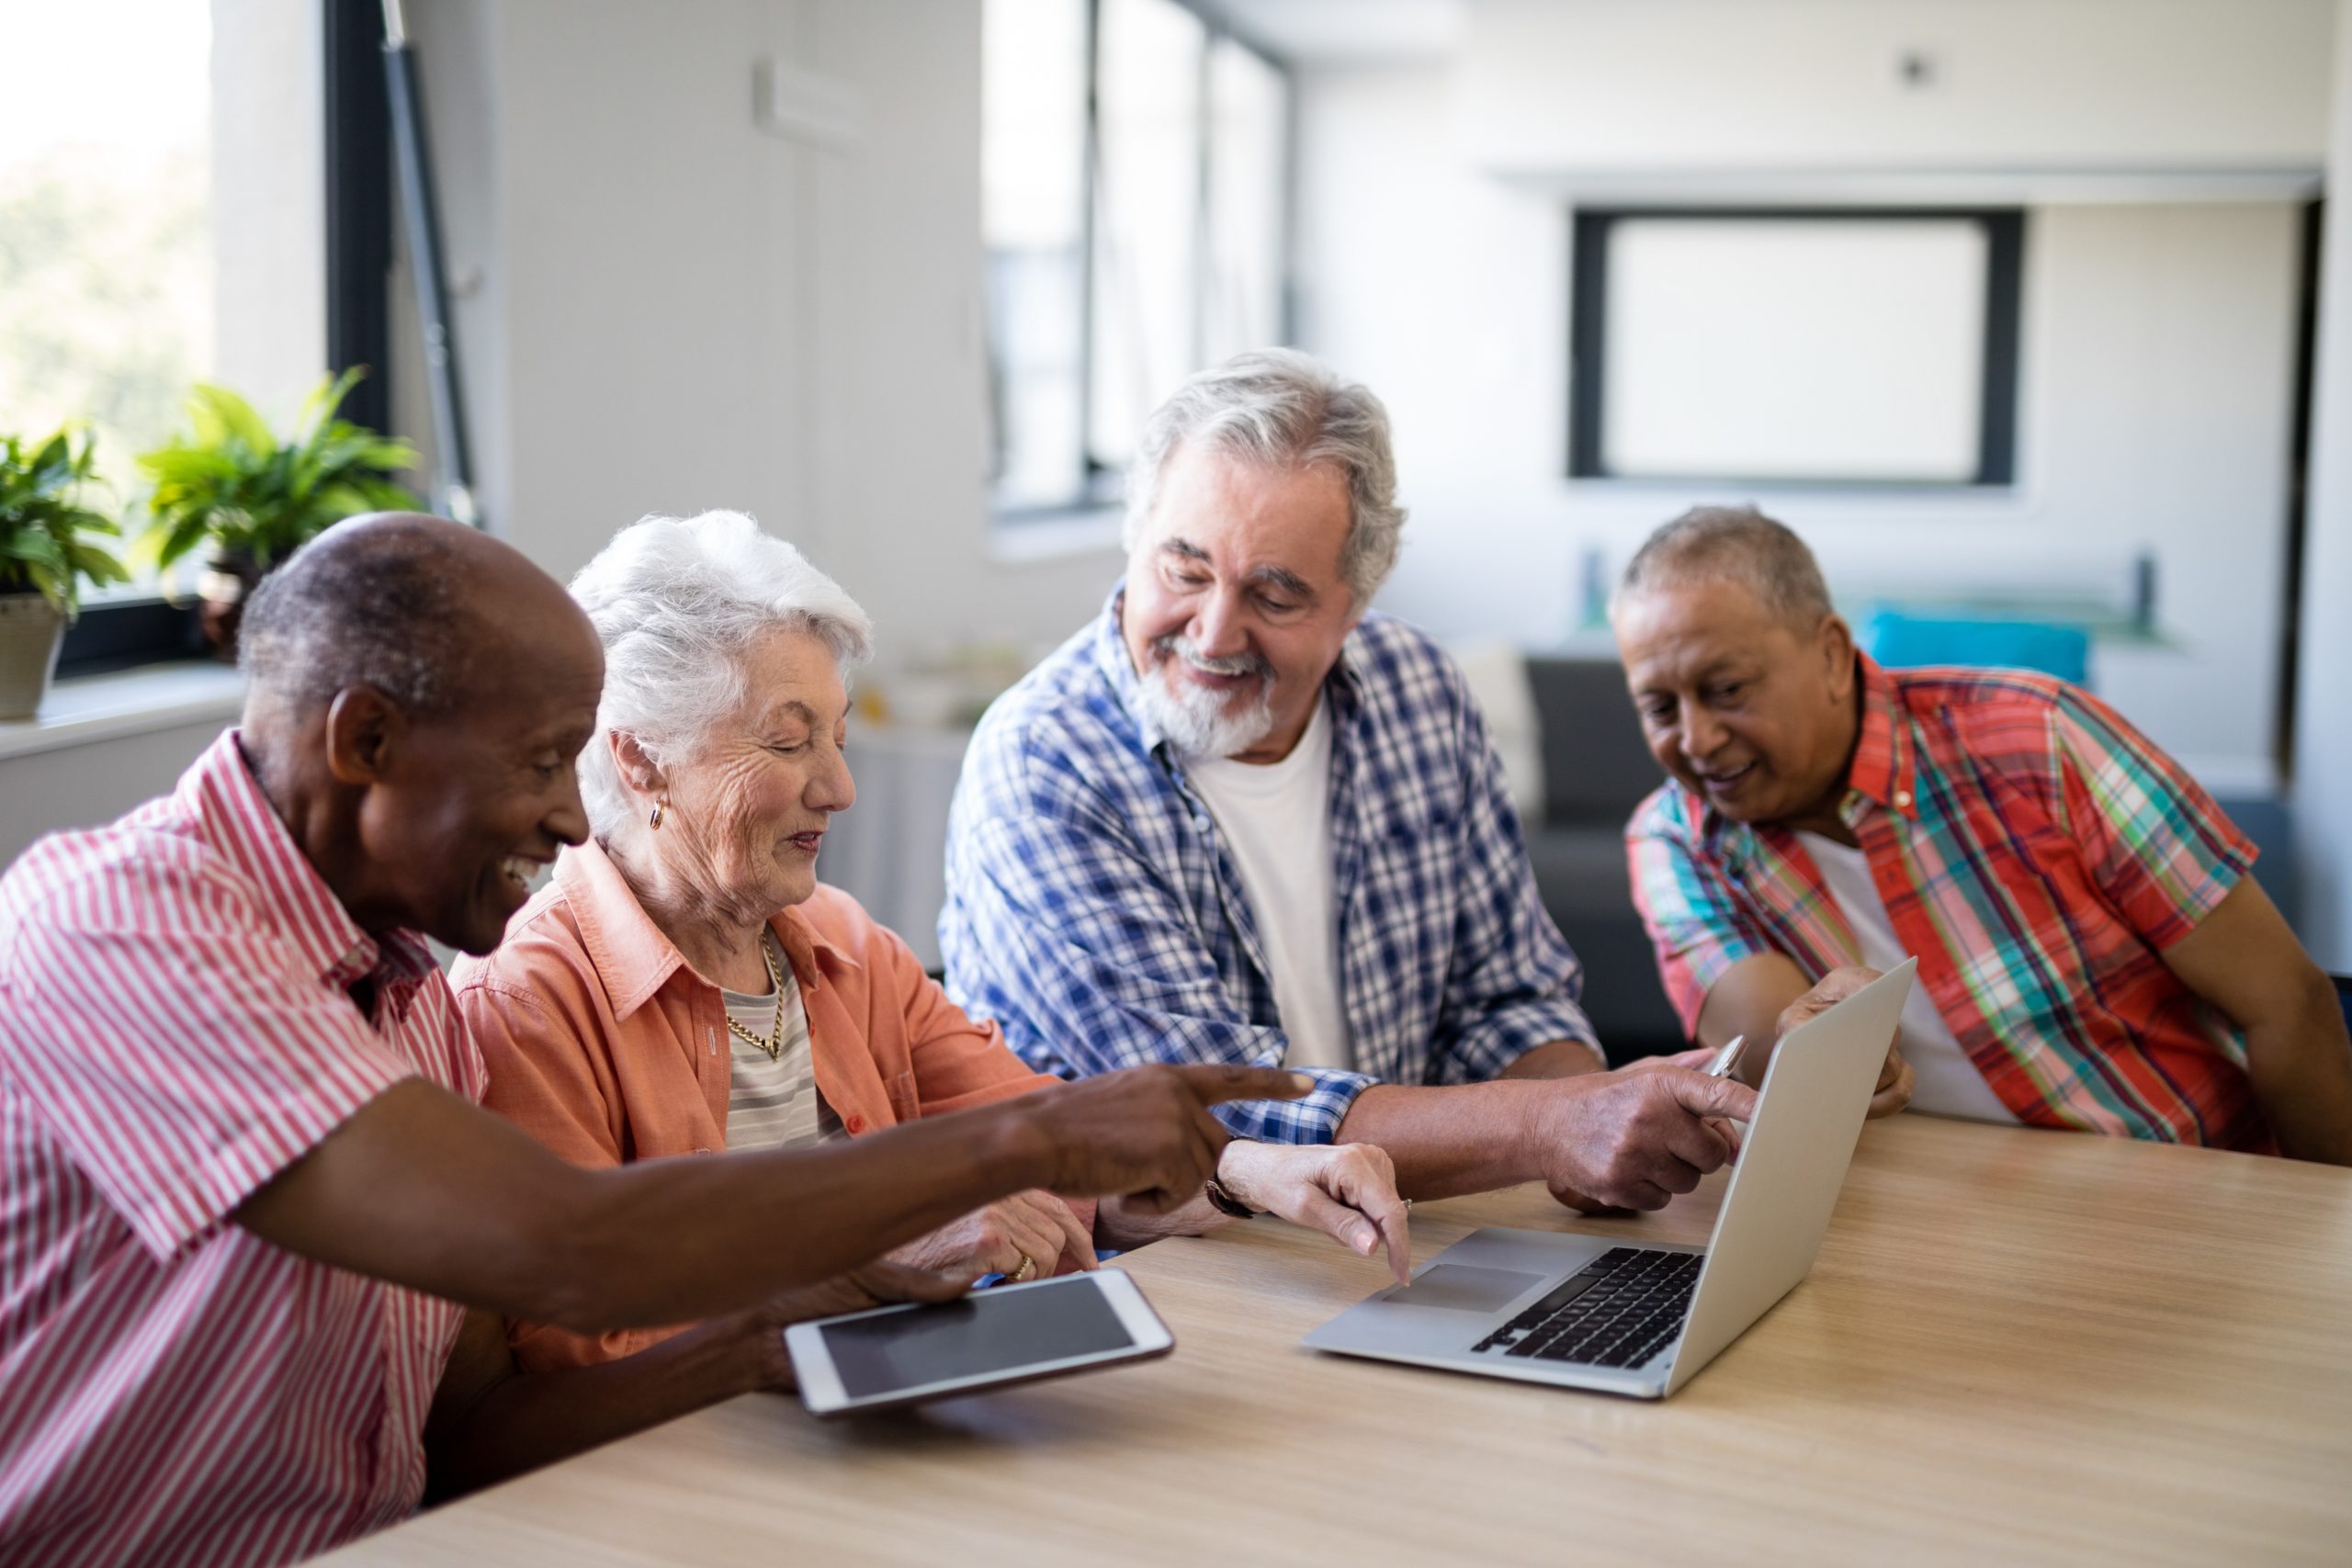 Group of elderly people at a table with computers